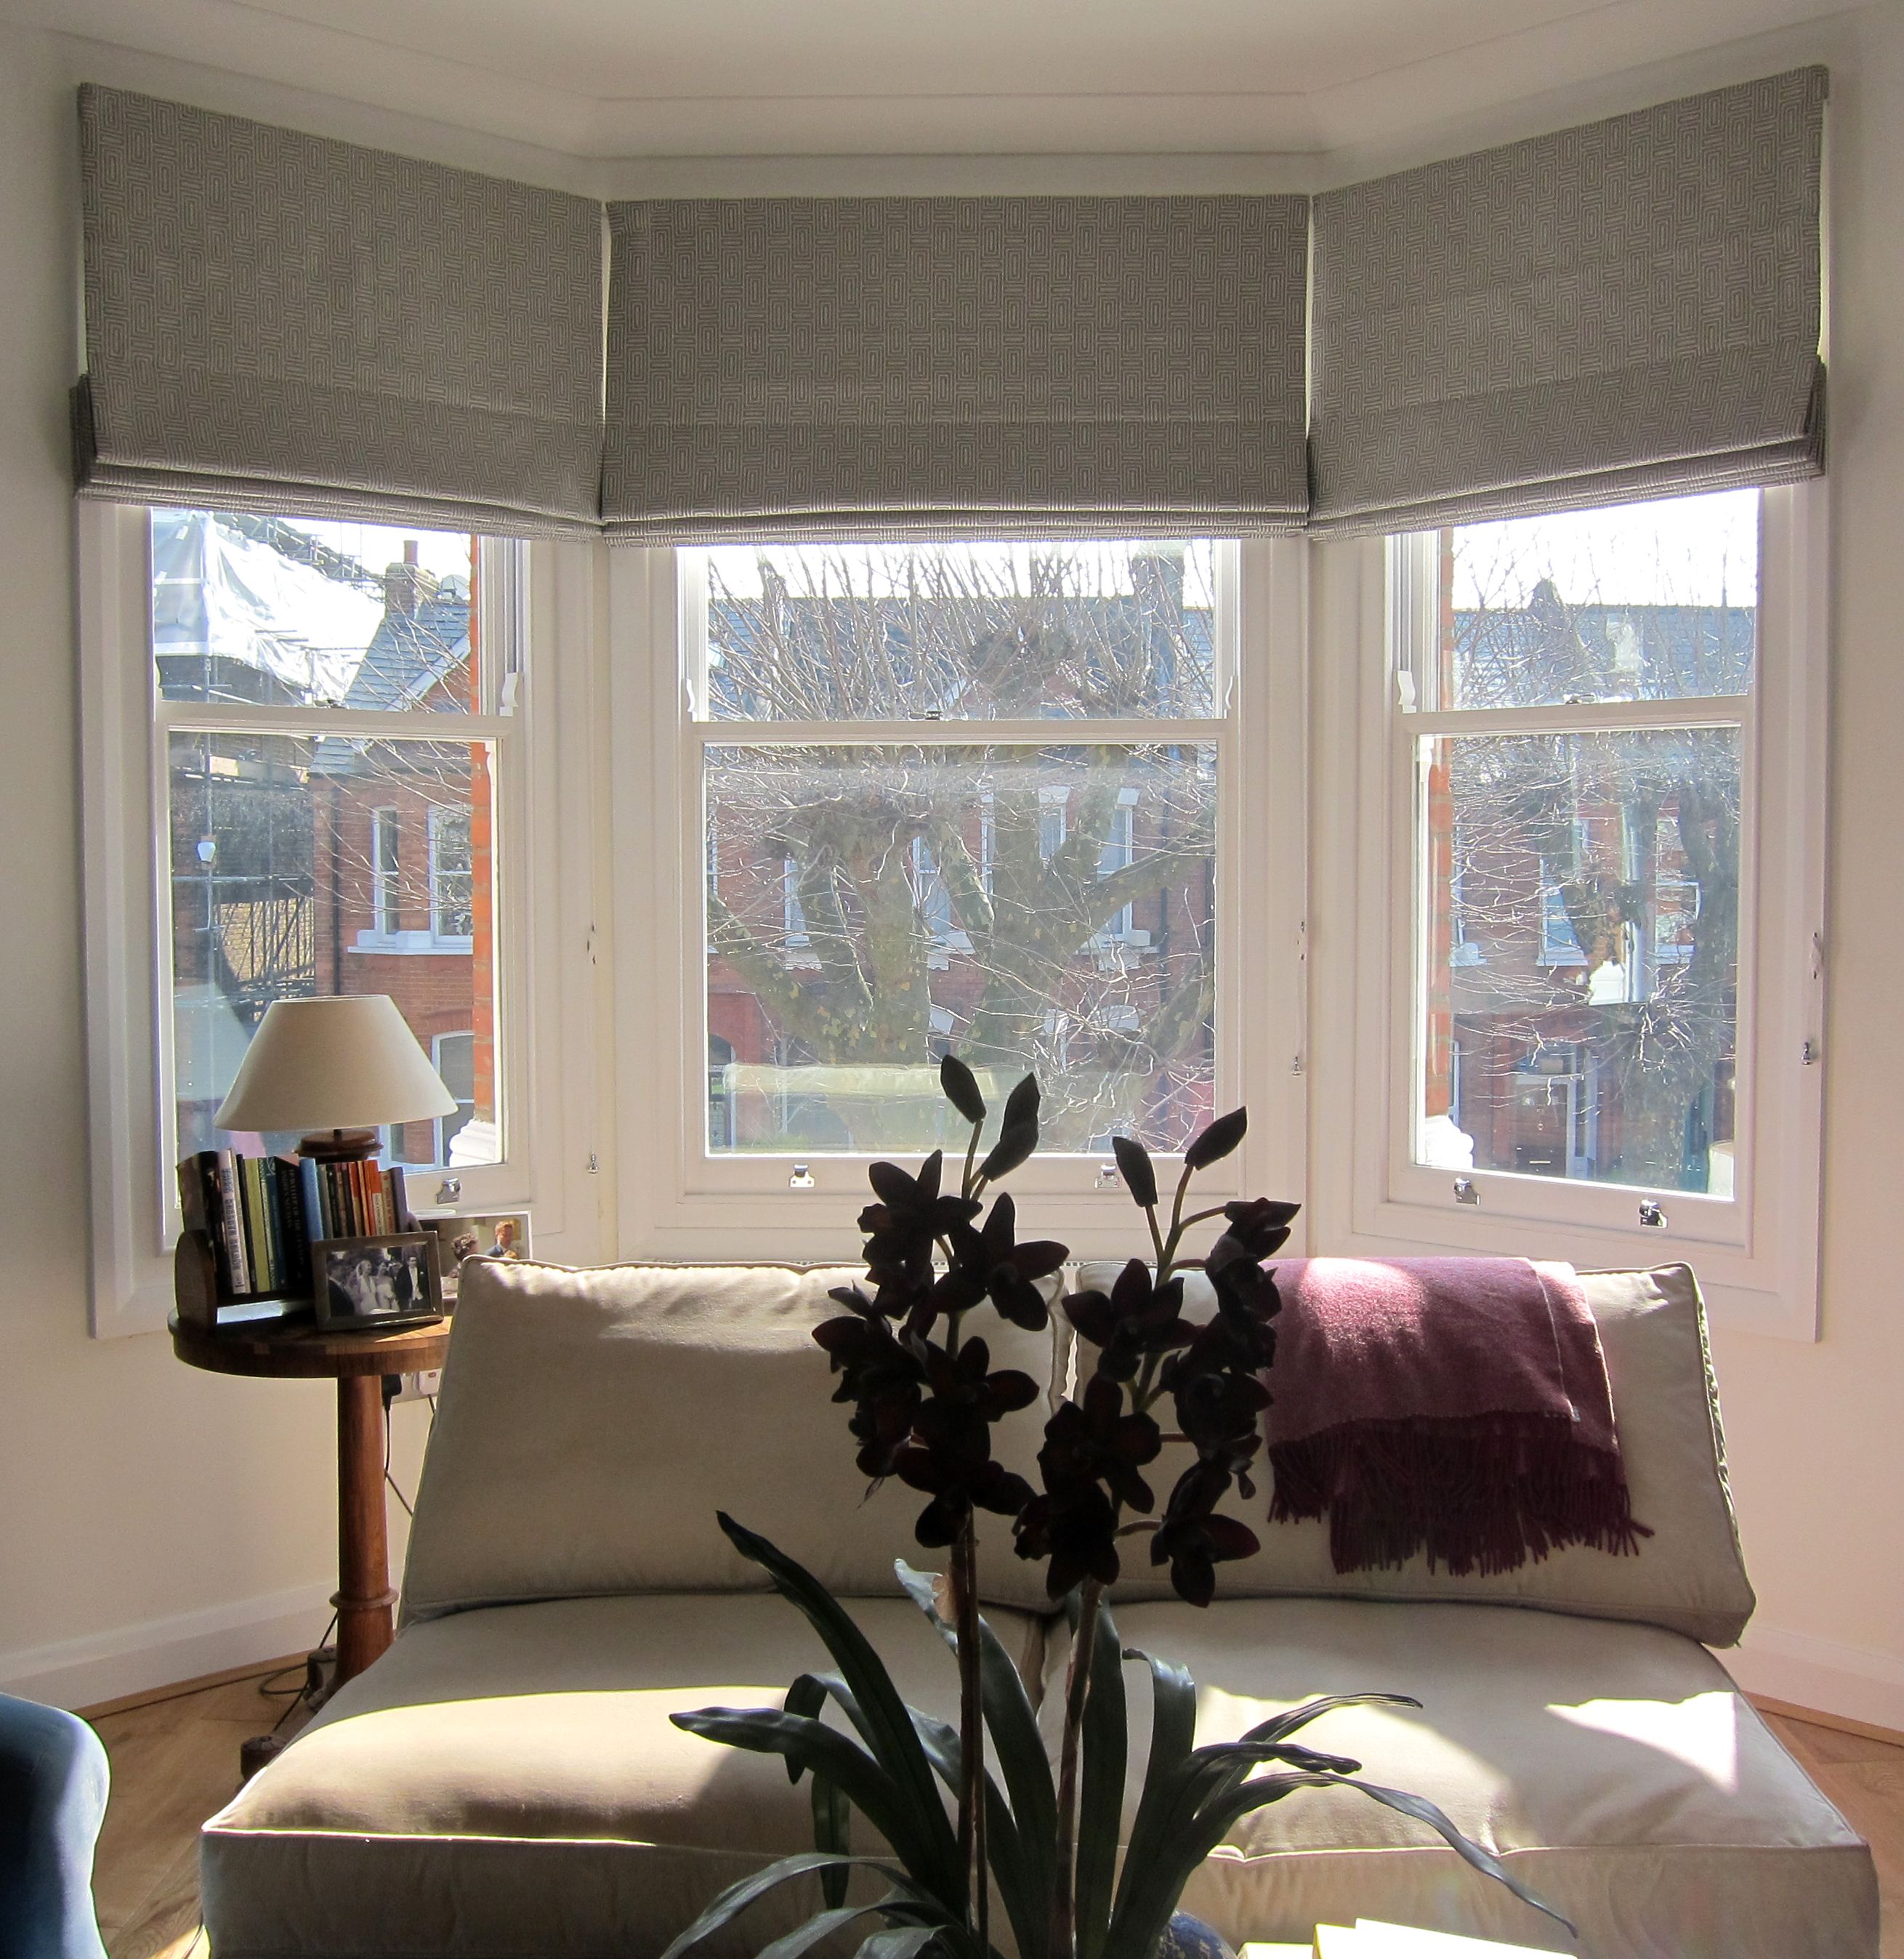 bay window blinds geometric patterned roman blinds in a bay window. could work in the KXQZZGS